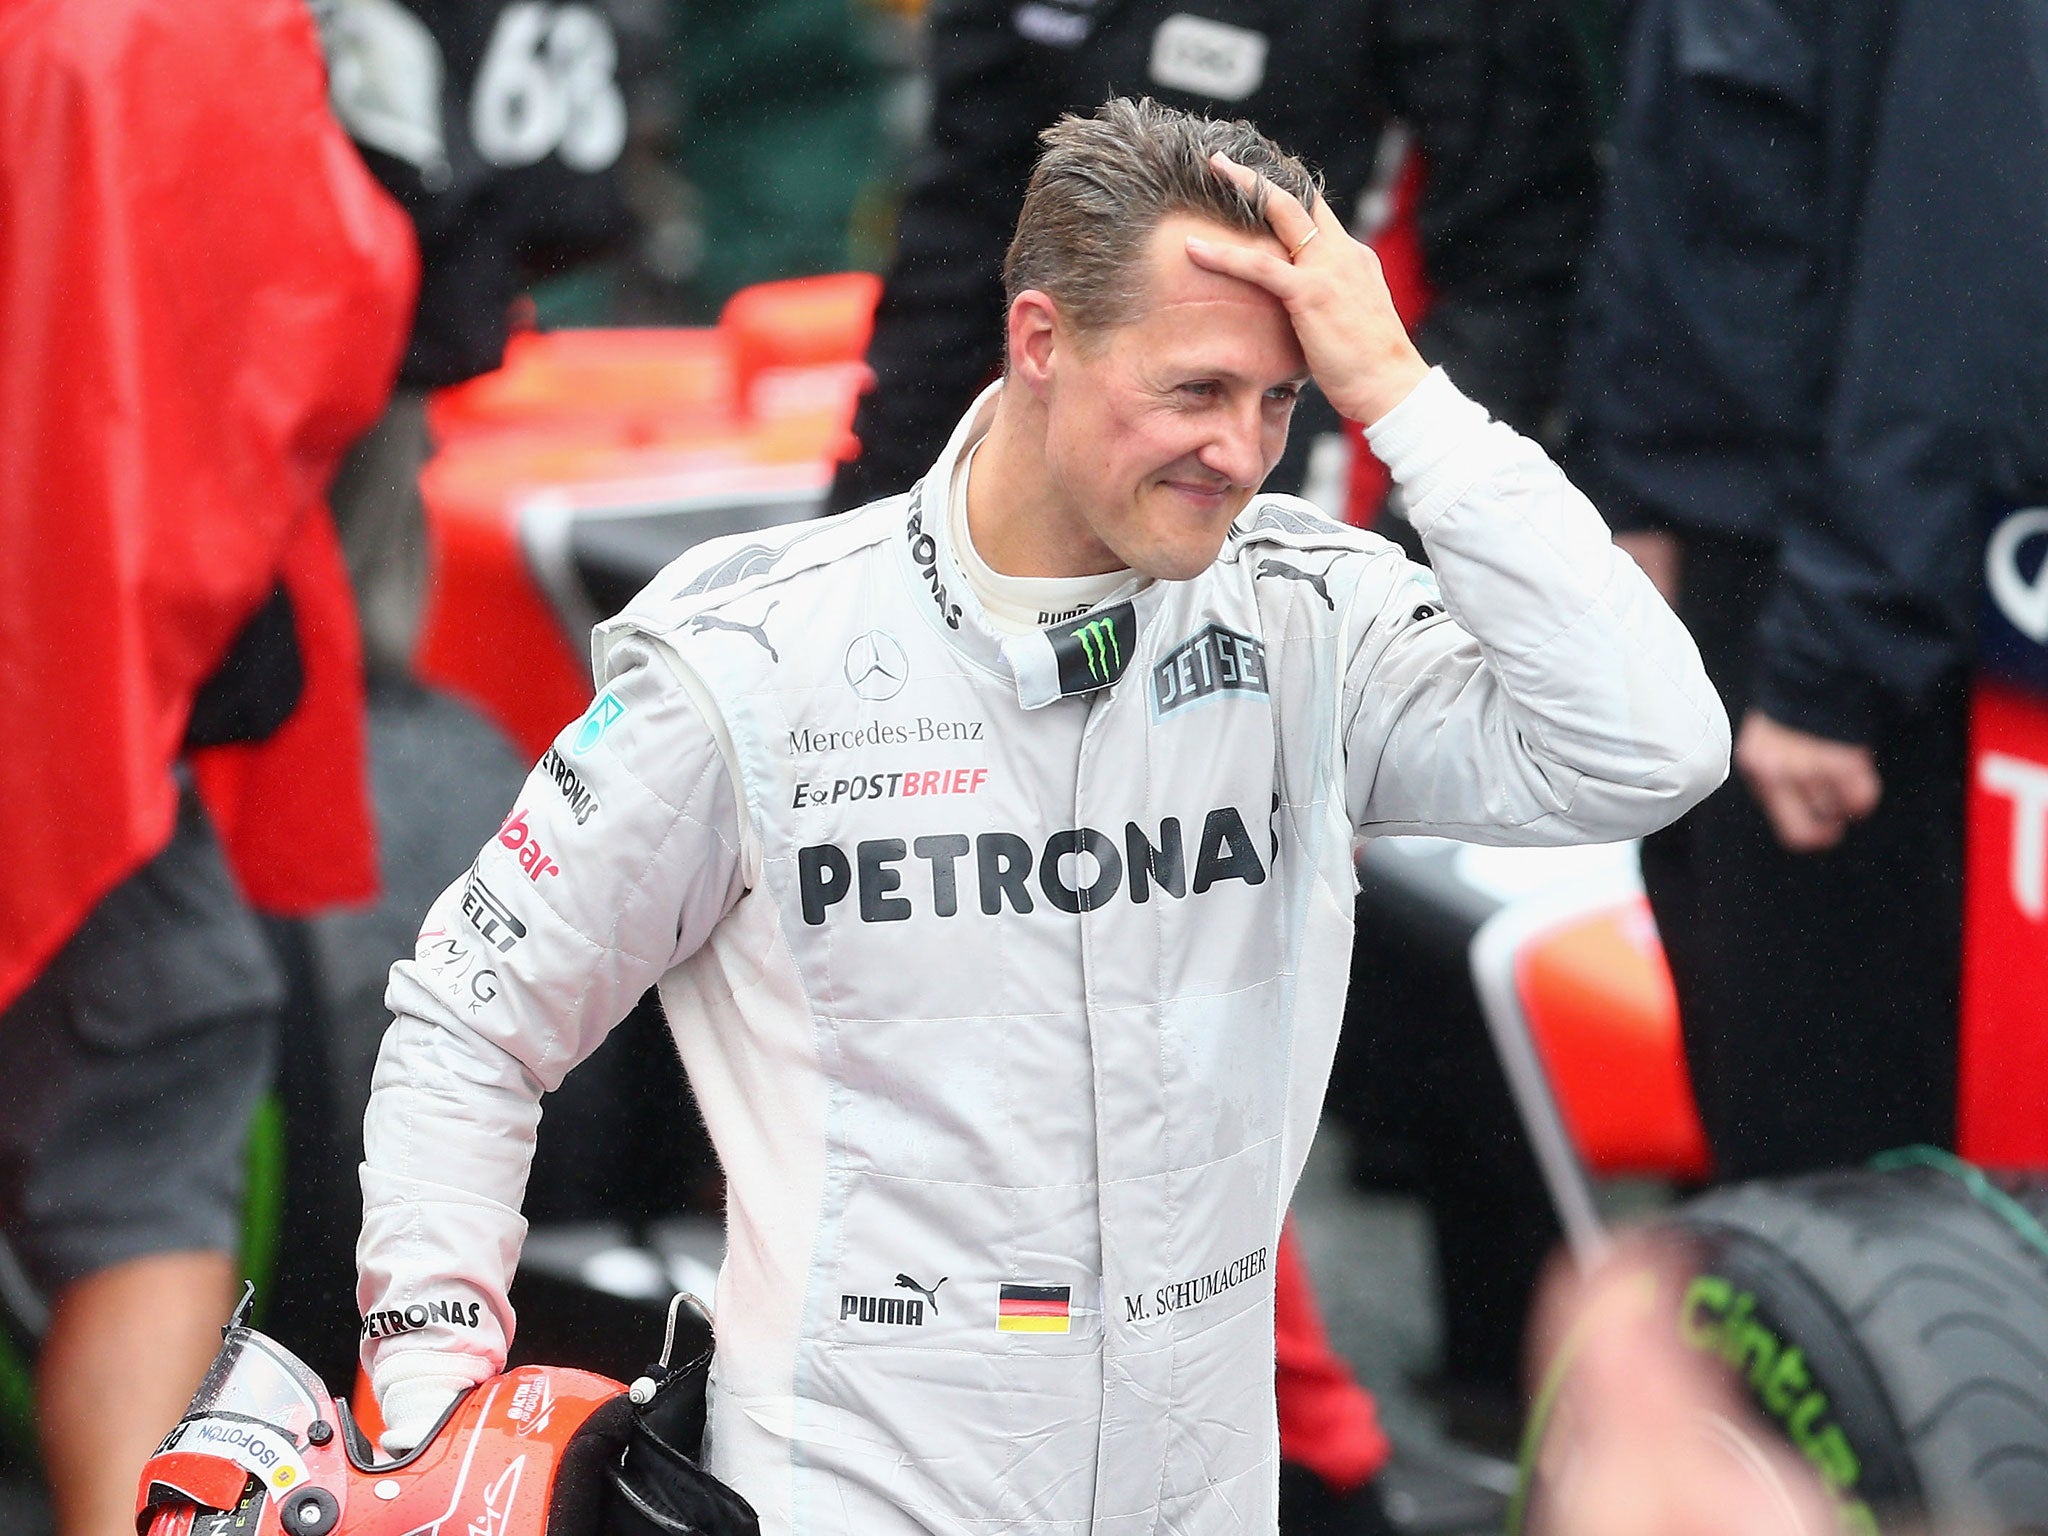 Schumacher returned to F1 in 2010 with Mercedes